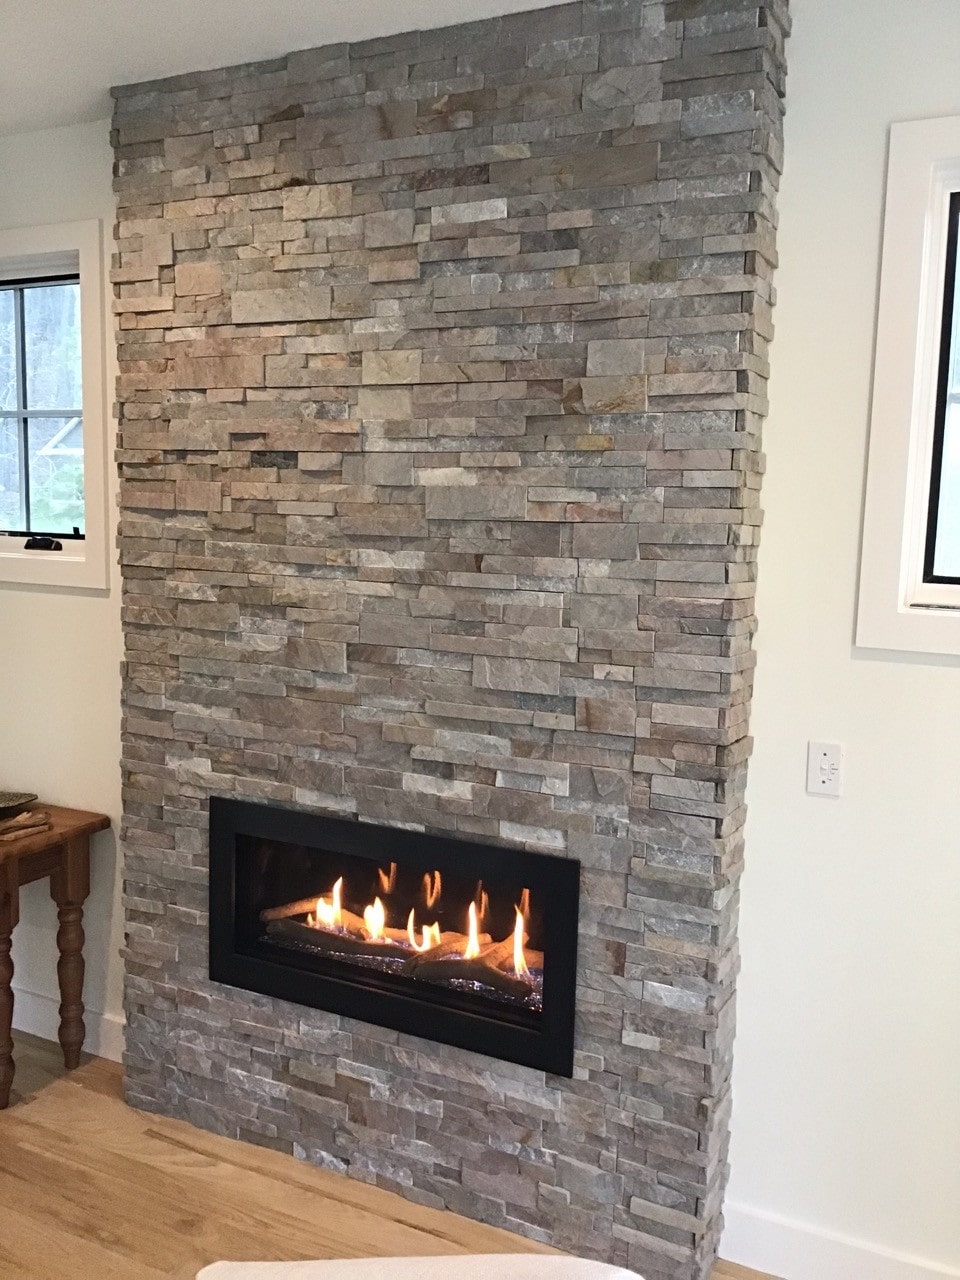 Stacked Stone Tile Fireplace Elegant norstone Blog Natural Stone Design Ideas and Projects